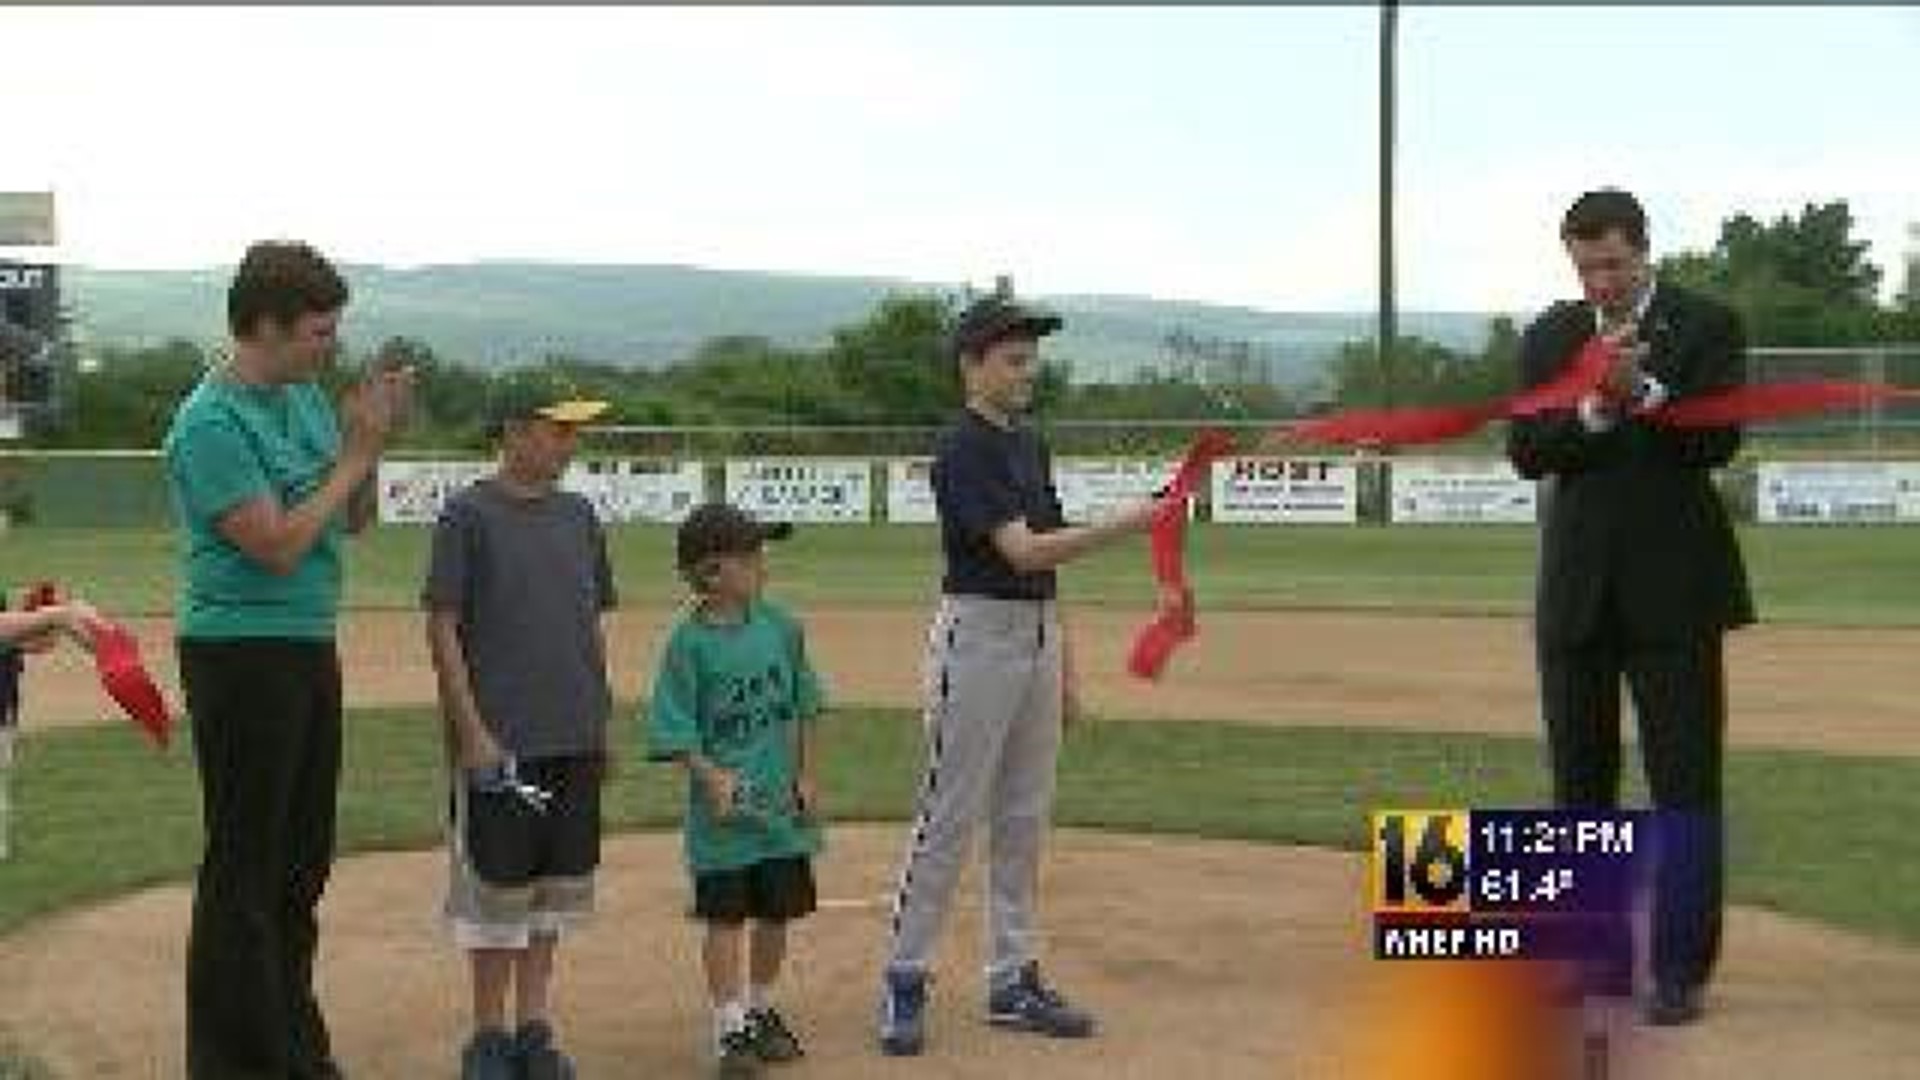 Sandlot Spruced Up By RailRiders Crew